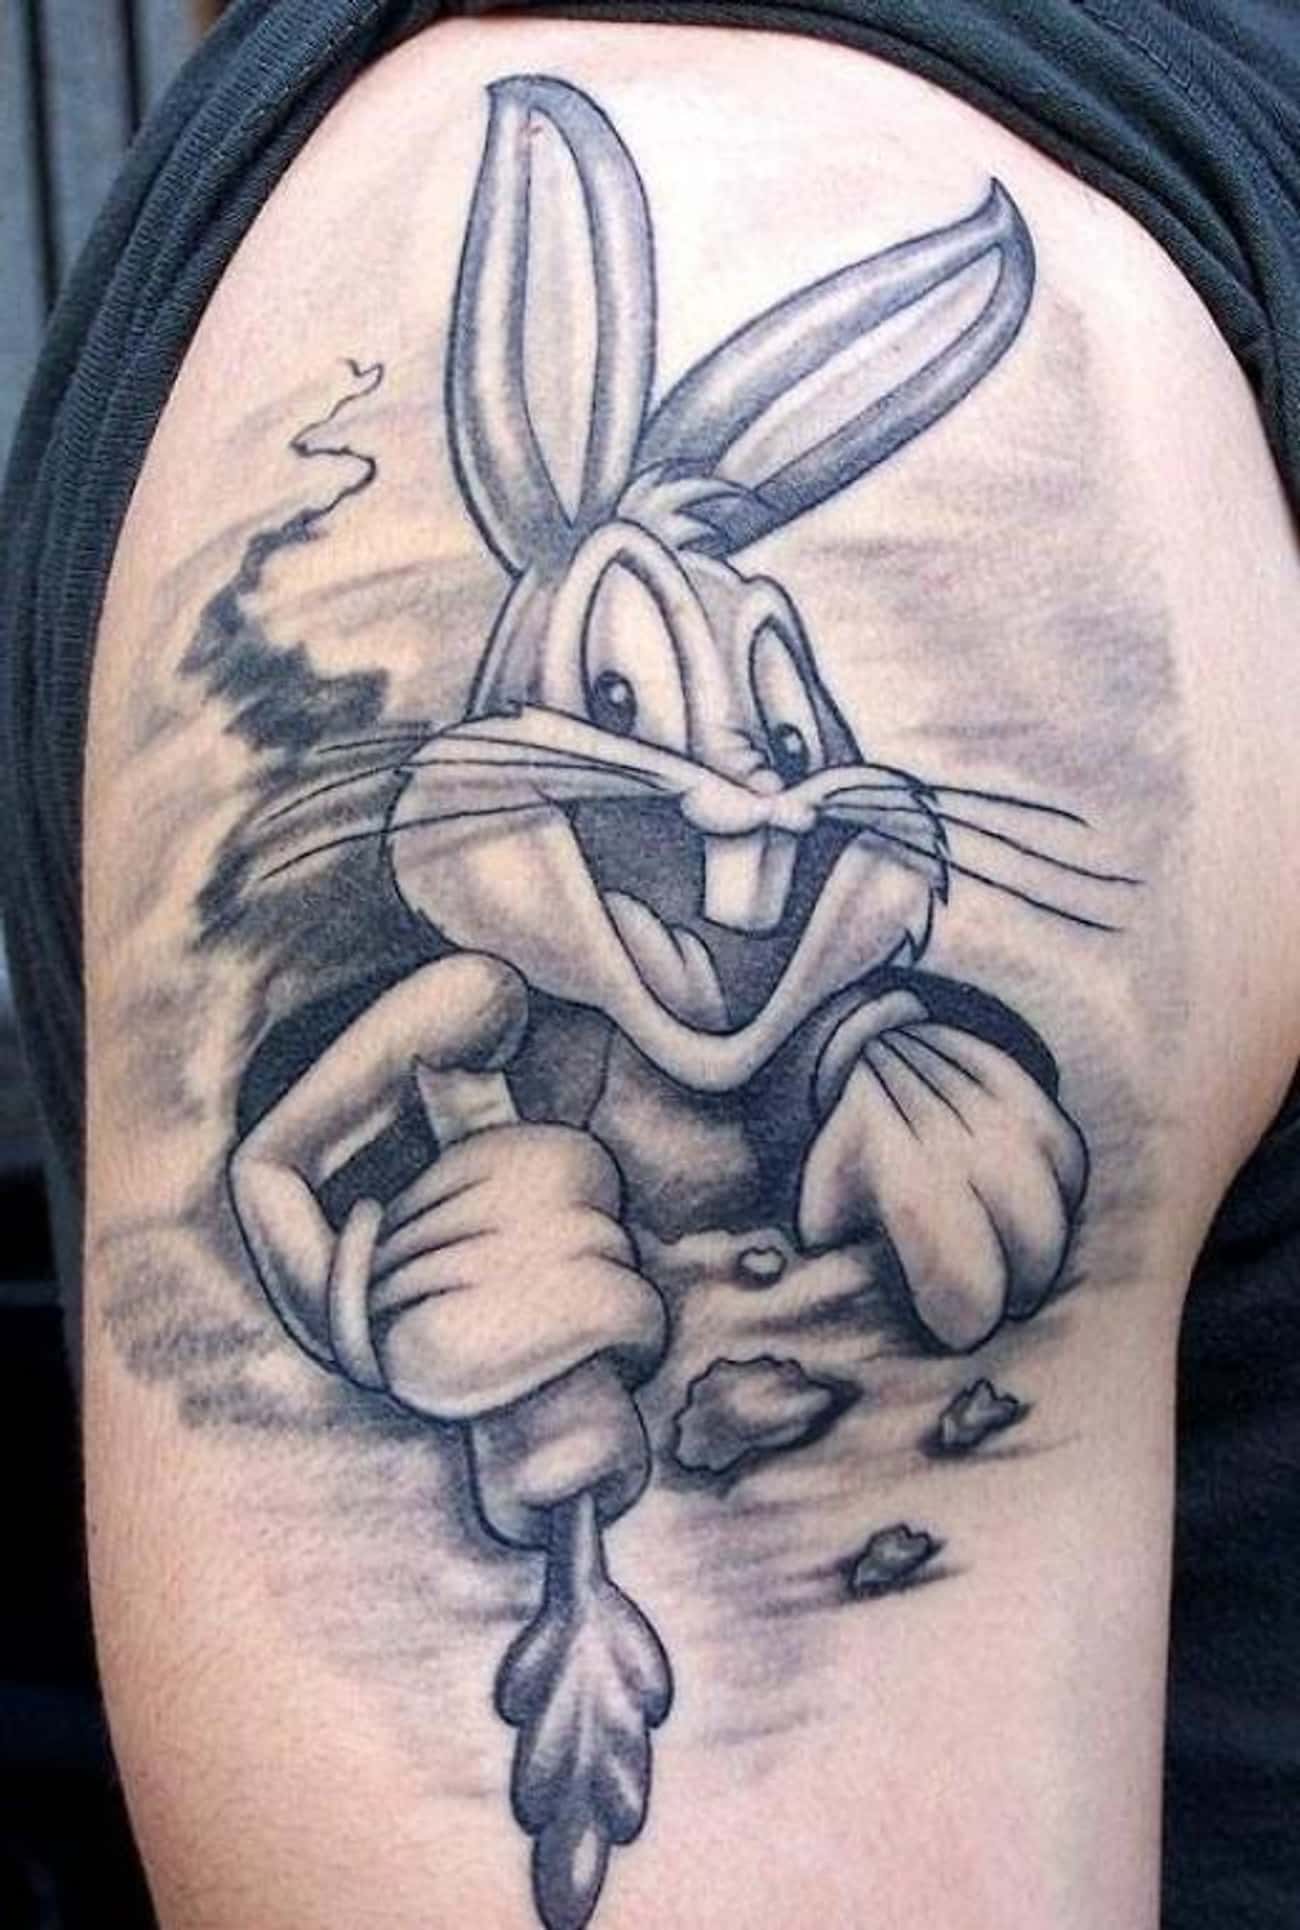 Looney Toons Tattoo Ideas Cool Tattoos Inspired by Looney Tunes Youre So Co...